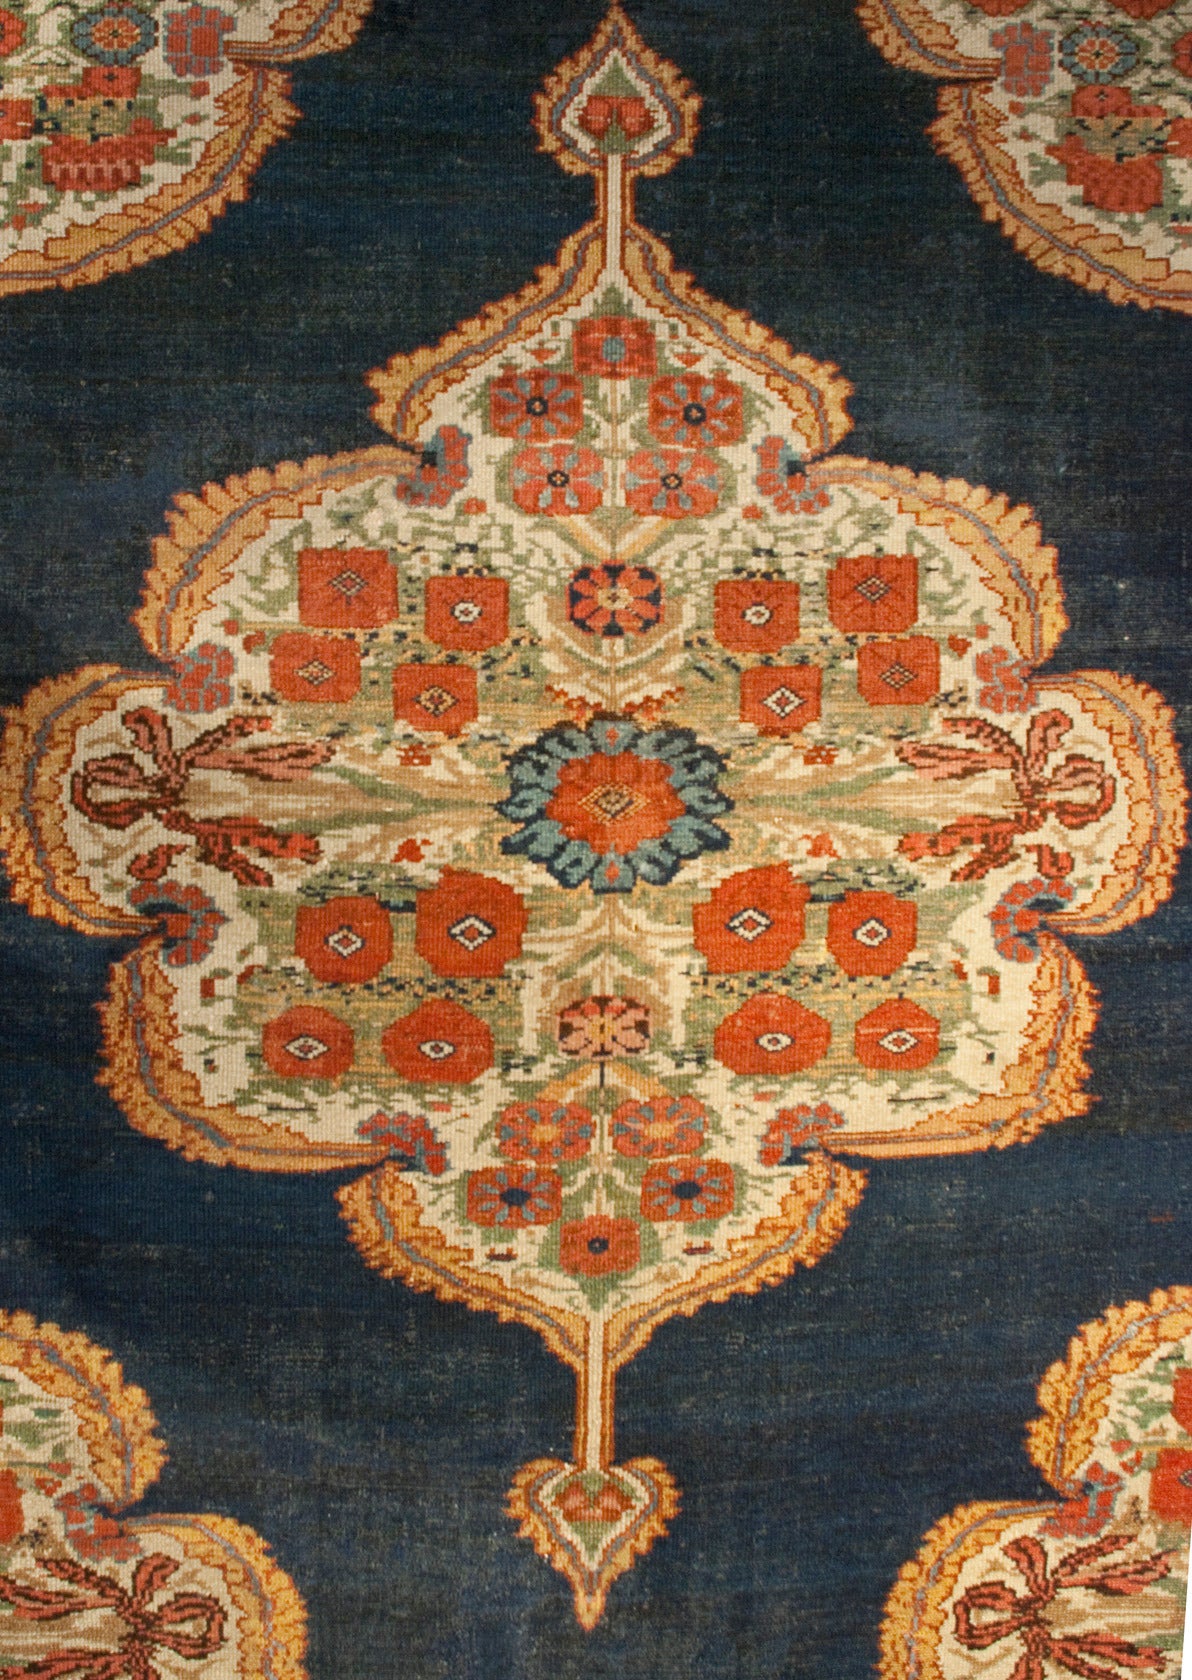 A beautifully woven, exceptional quality, early 20th century Bakhtiari Mission Malayer runner with three large-scale floral medallions on an indigo background, surrounded by an even more beautiful floral border.